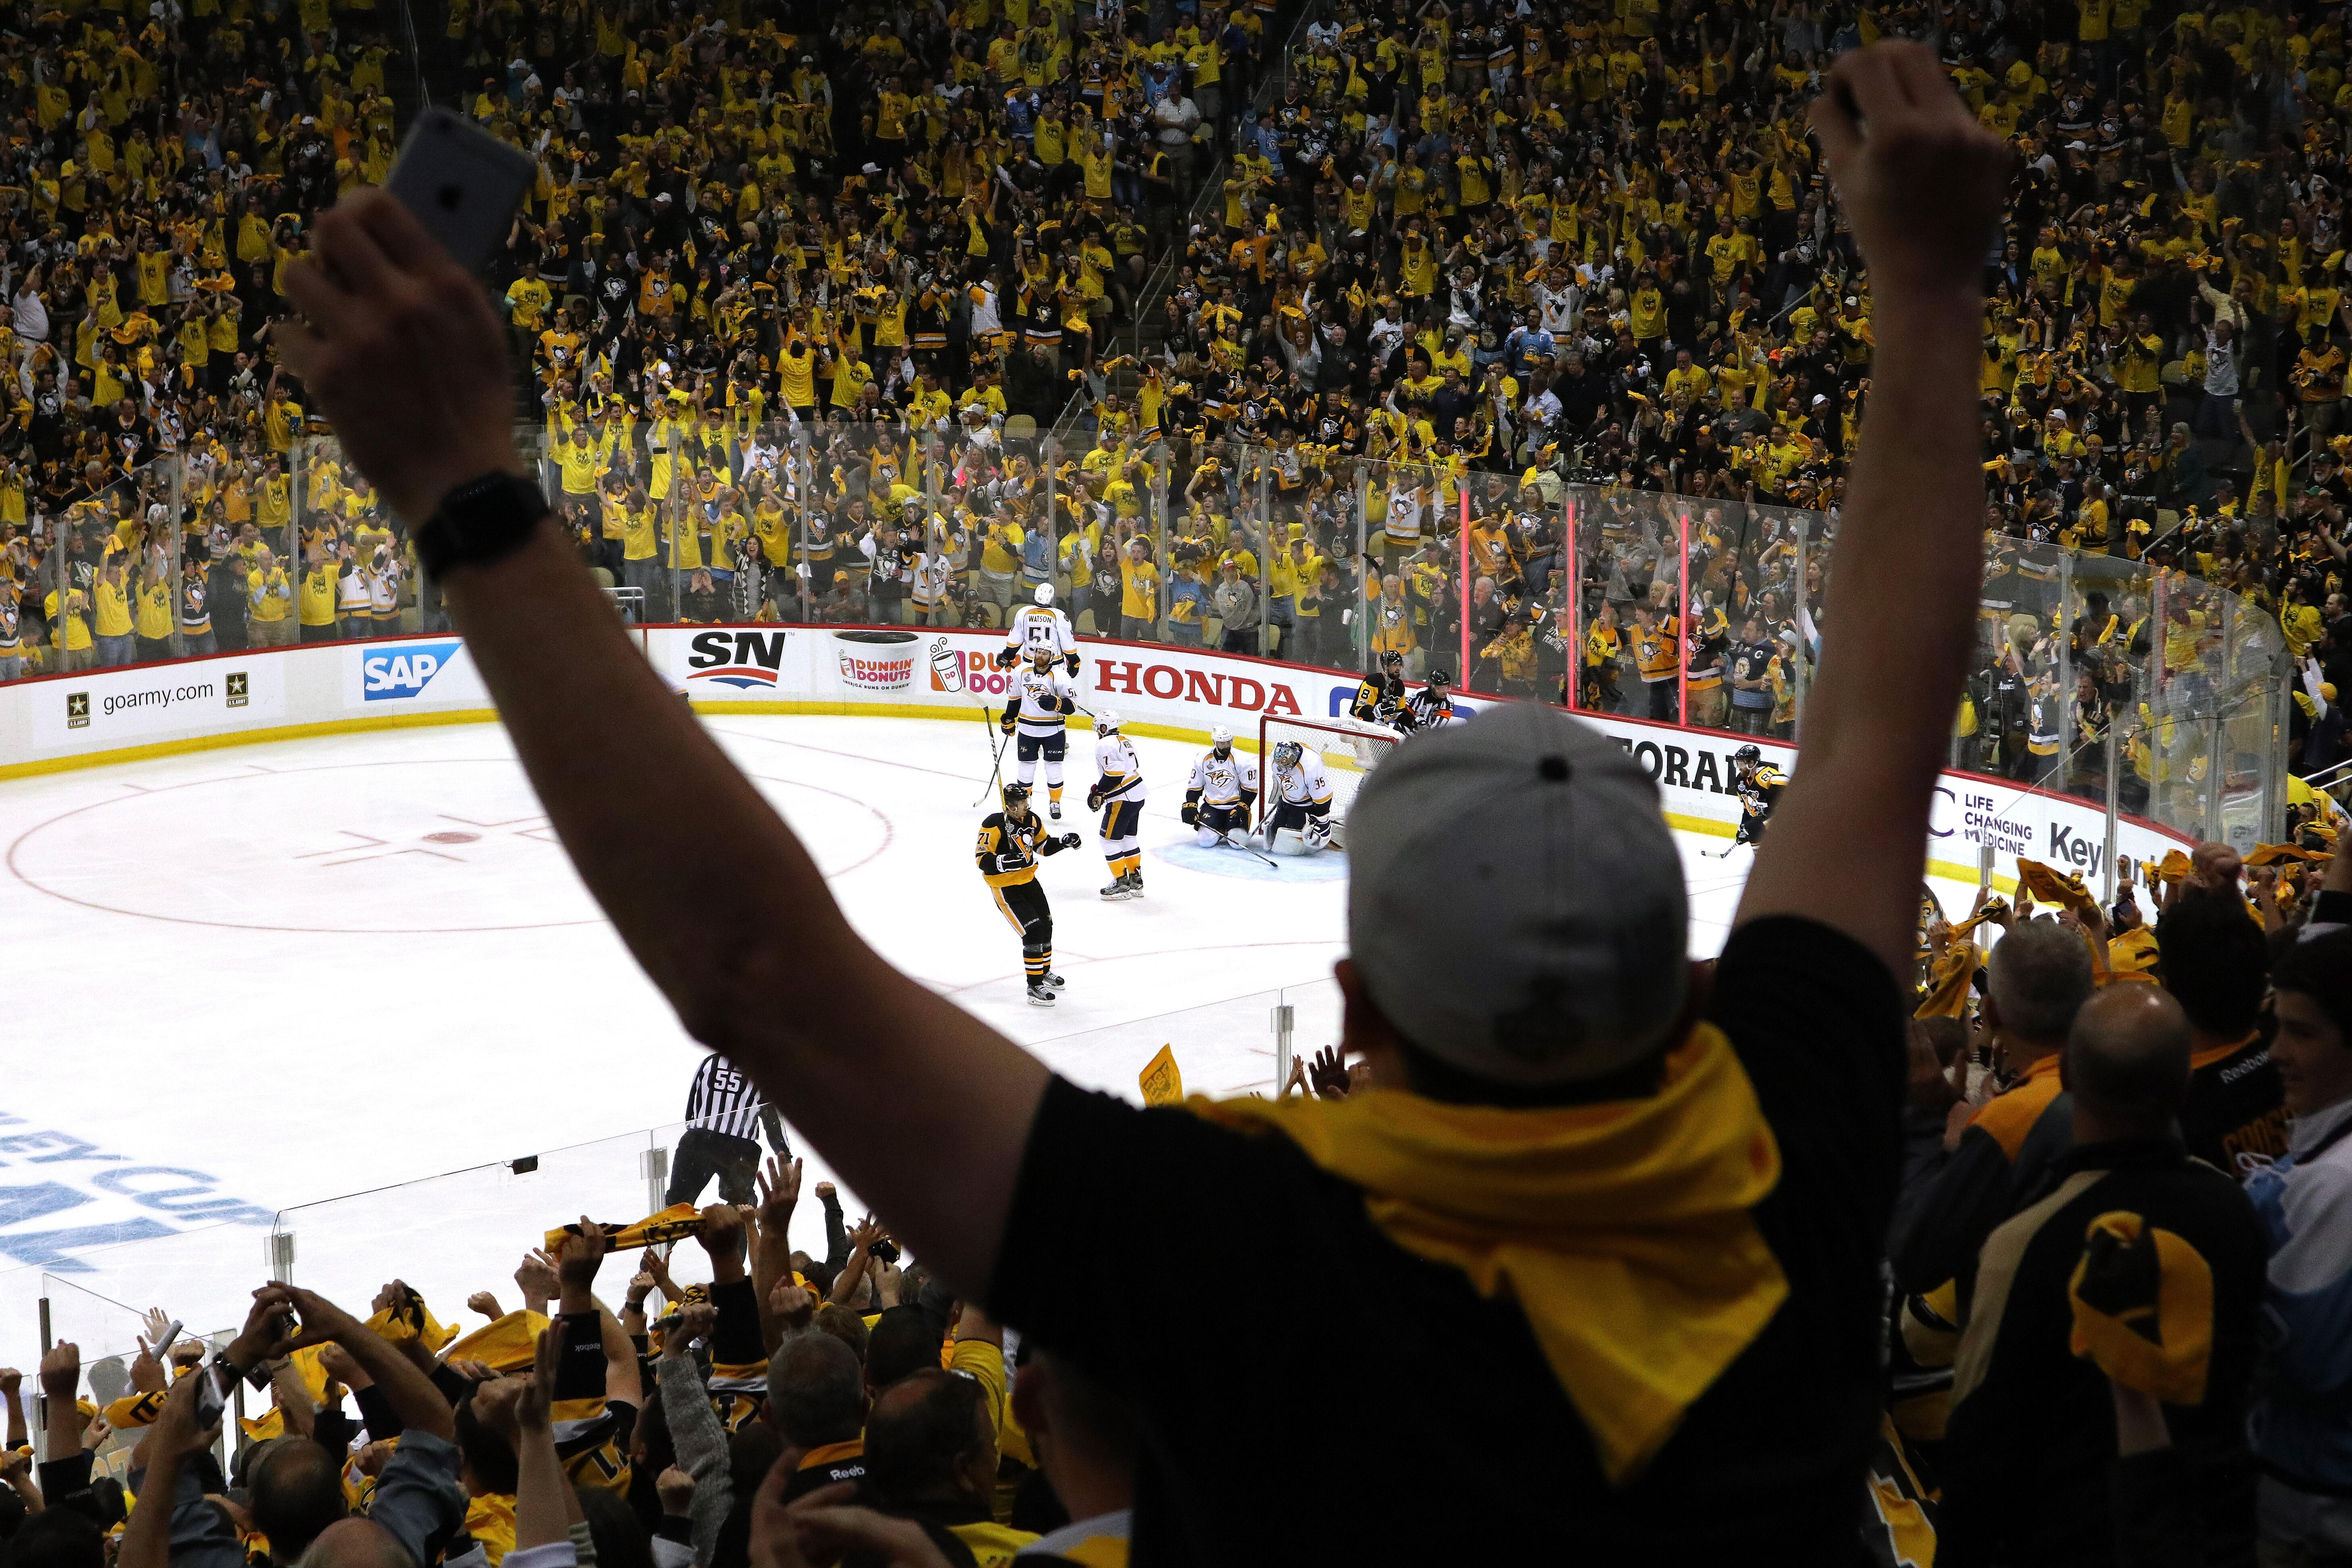 Penguins hold annual Fan Appreciation Night at PPG Paints Arena